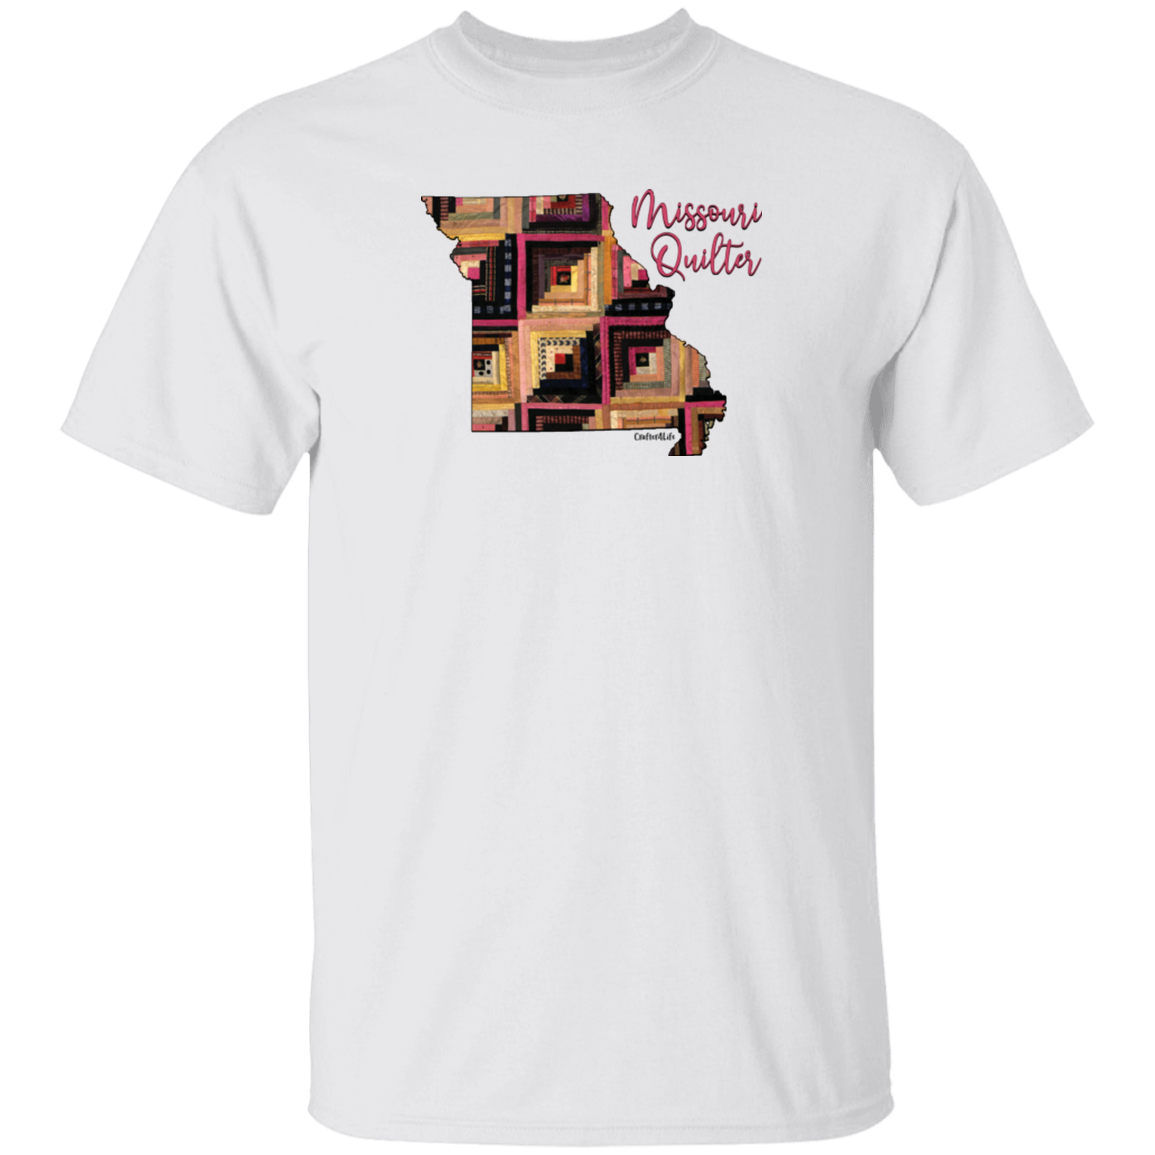 Missouri Quilter T-Shirt, Gift for Quilting Friends and Family